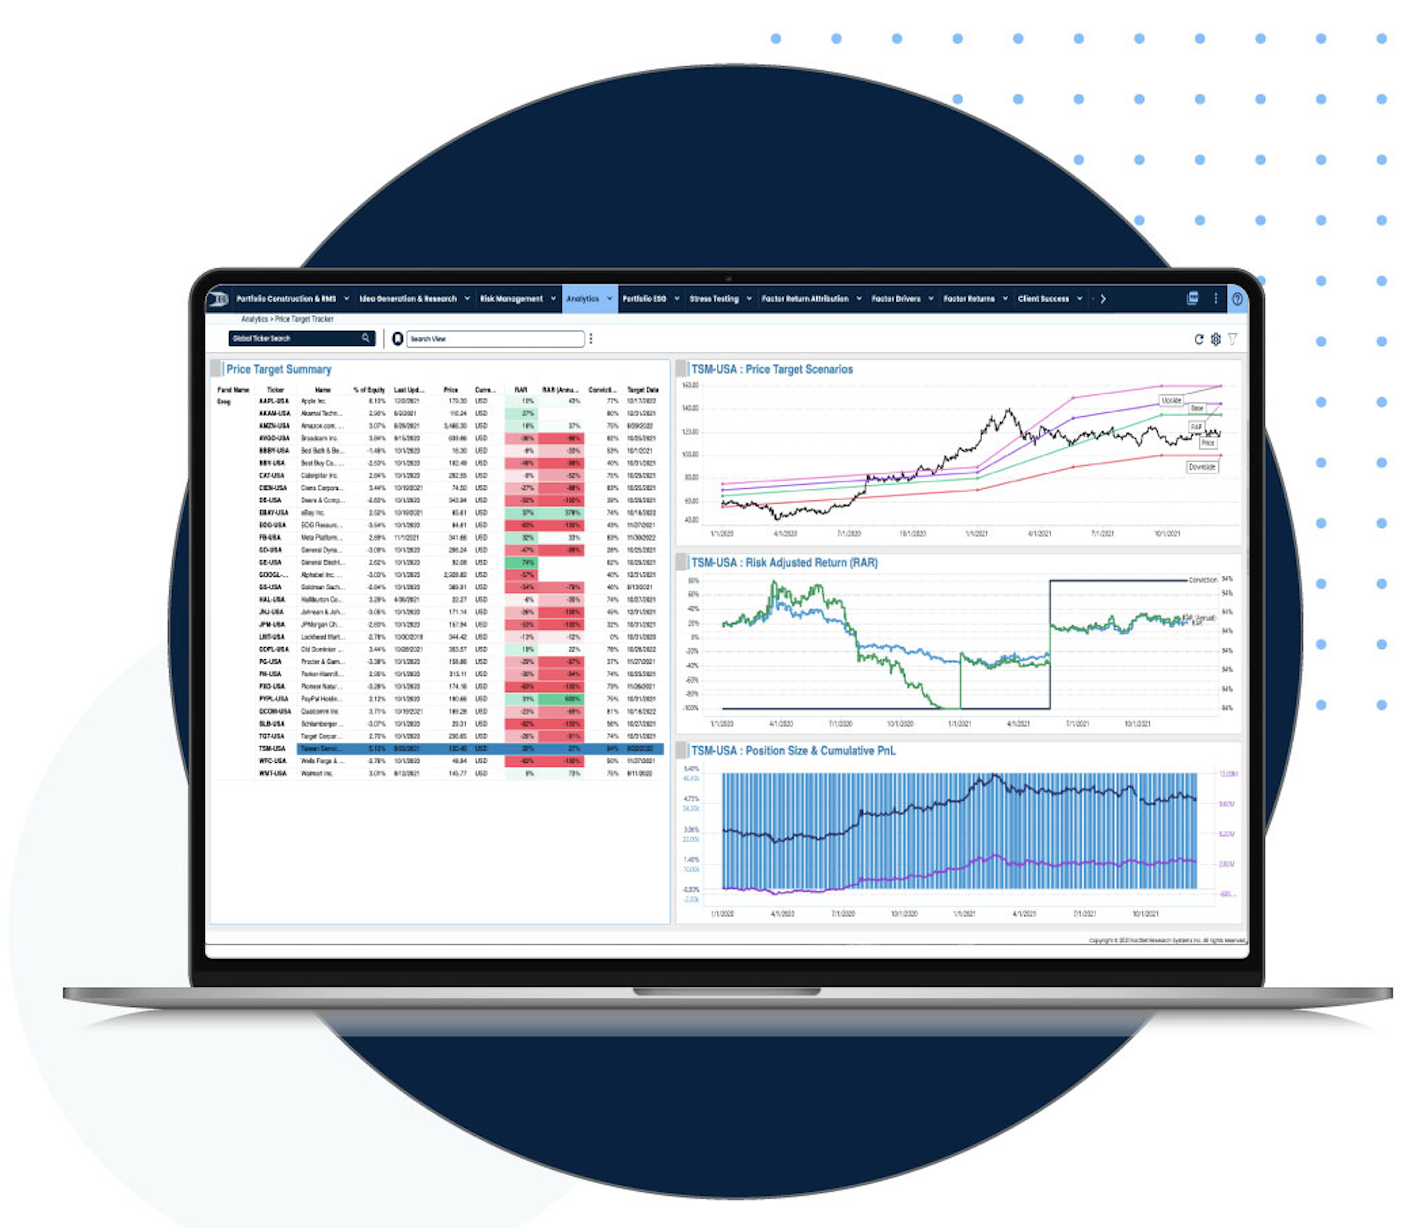 Price Targets: View your price targets historically across various funds, scenarios, and analysts for a particular security